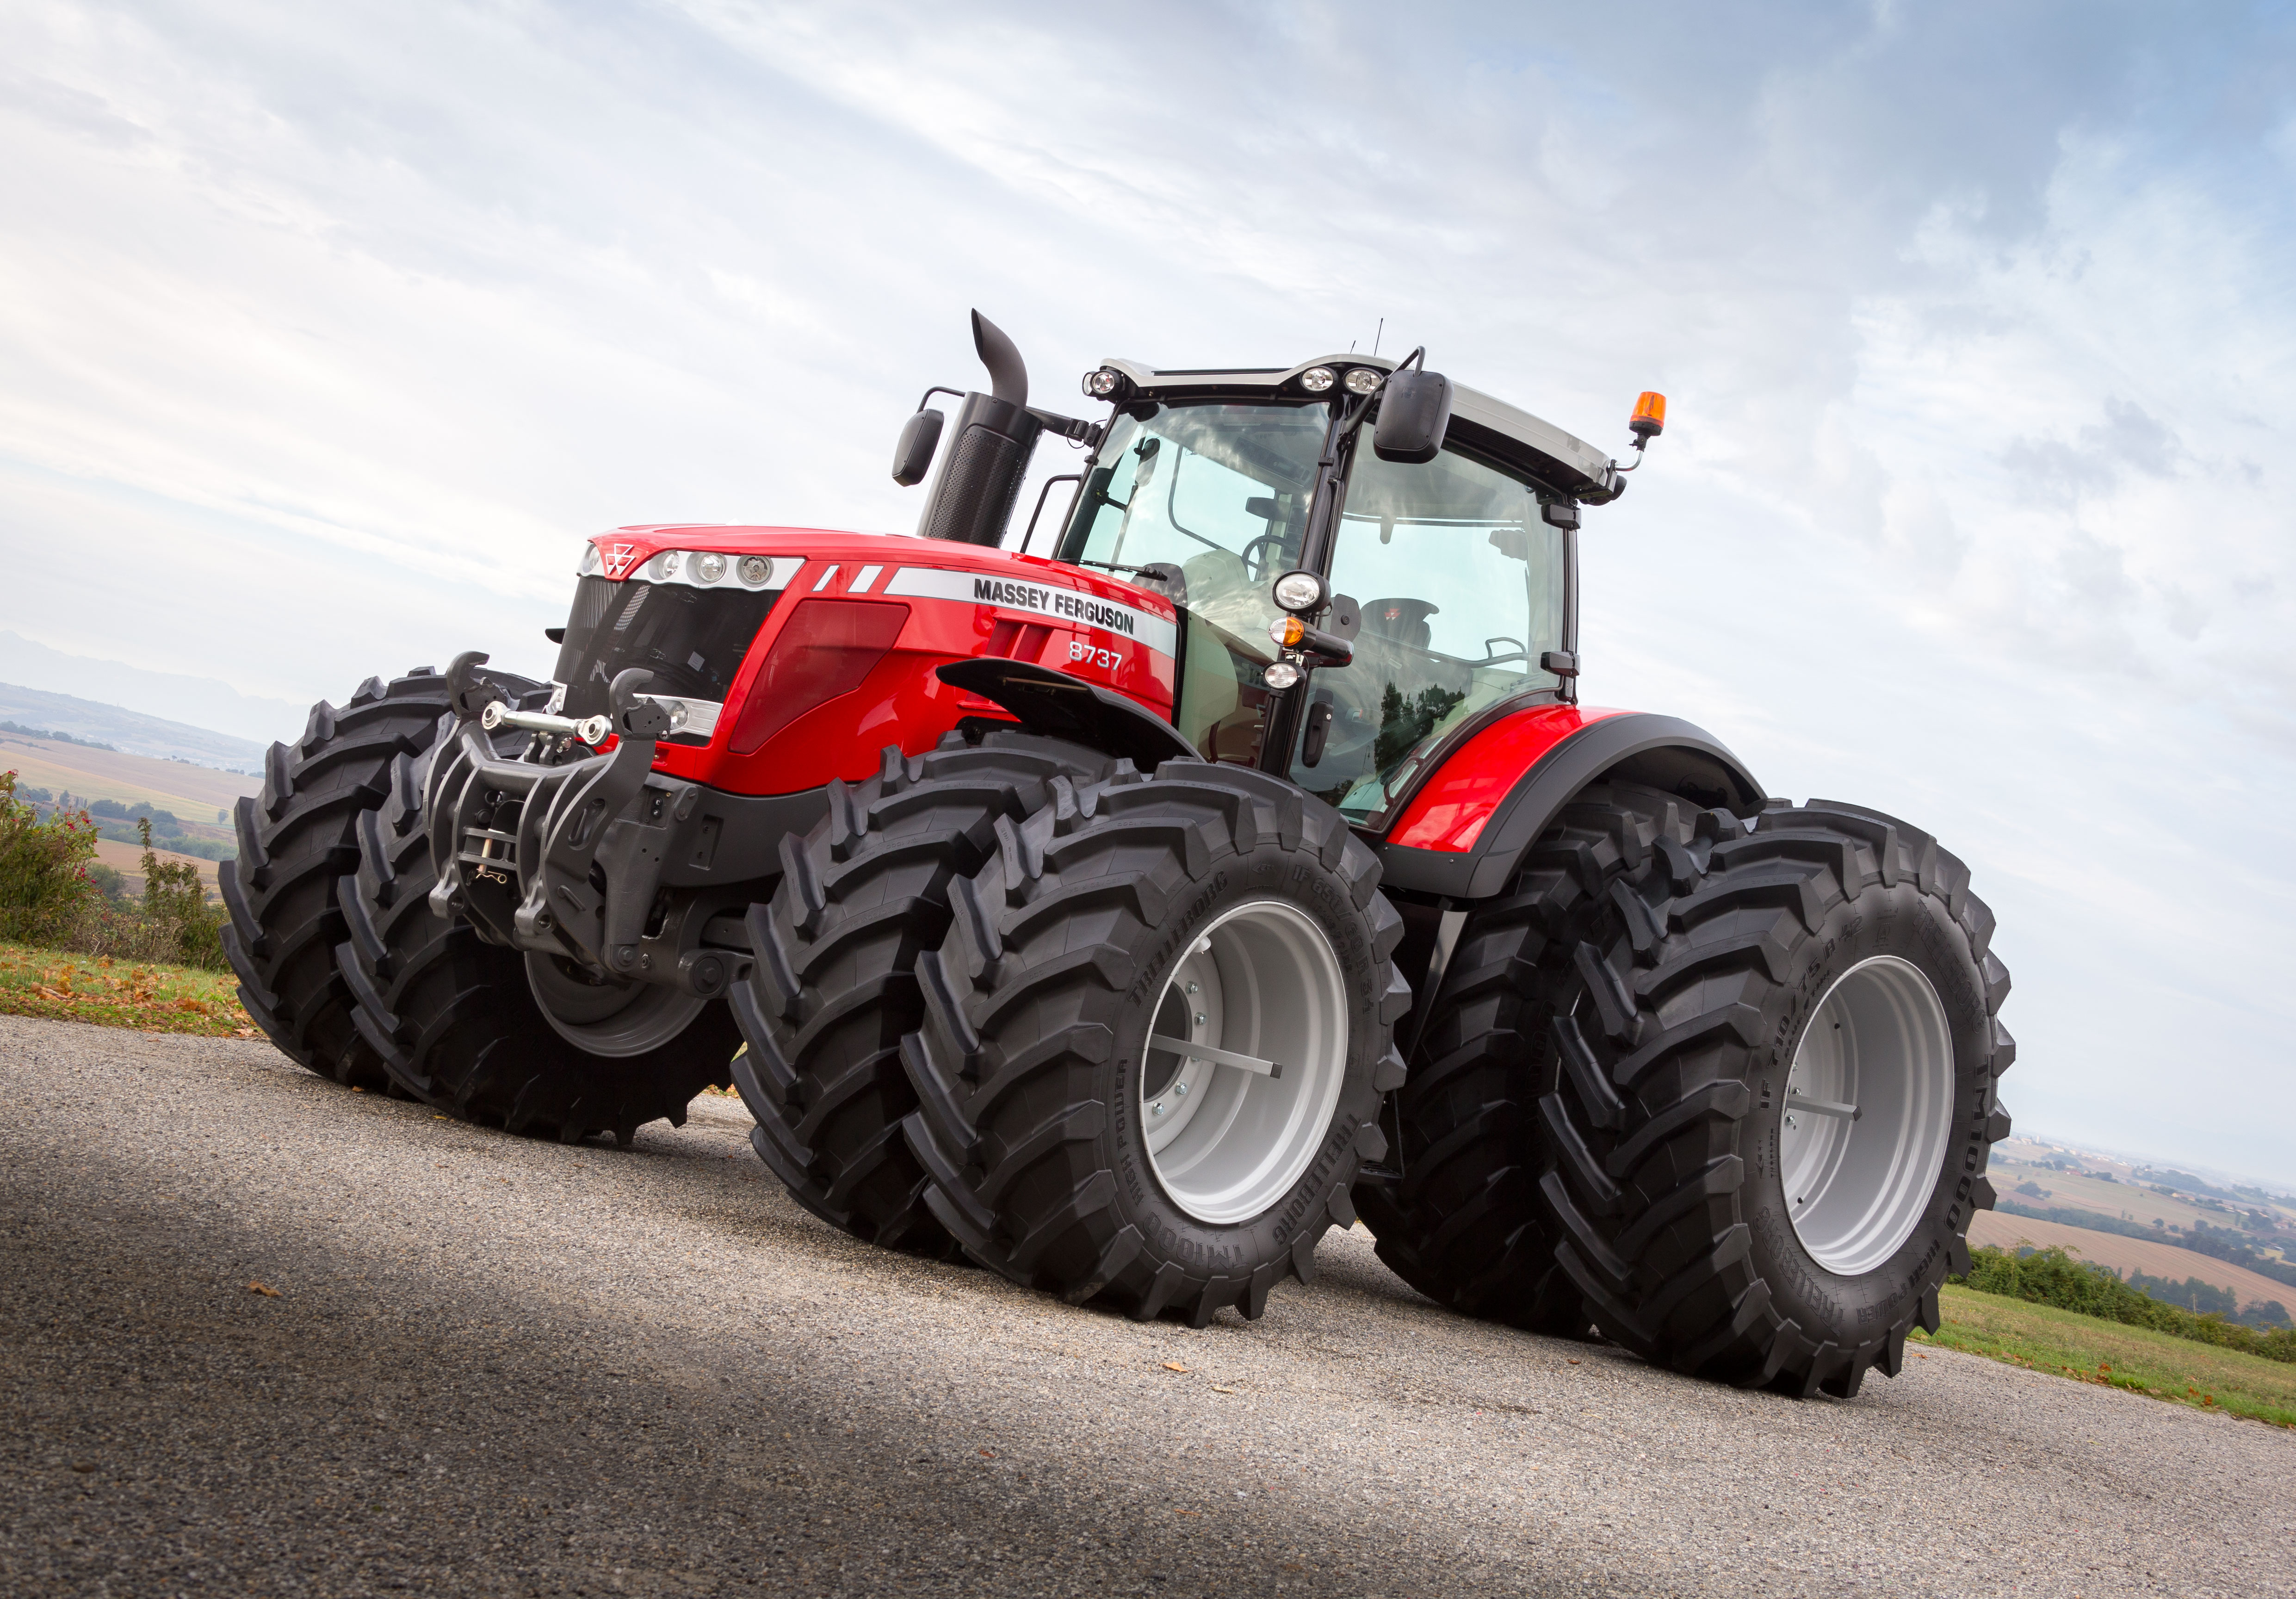 The mighty 400hp MF 8737 – Massey Ferguson’s most powerful tractor ...